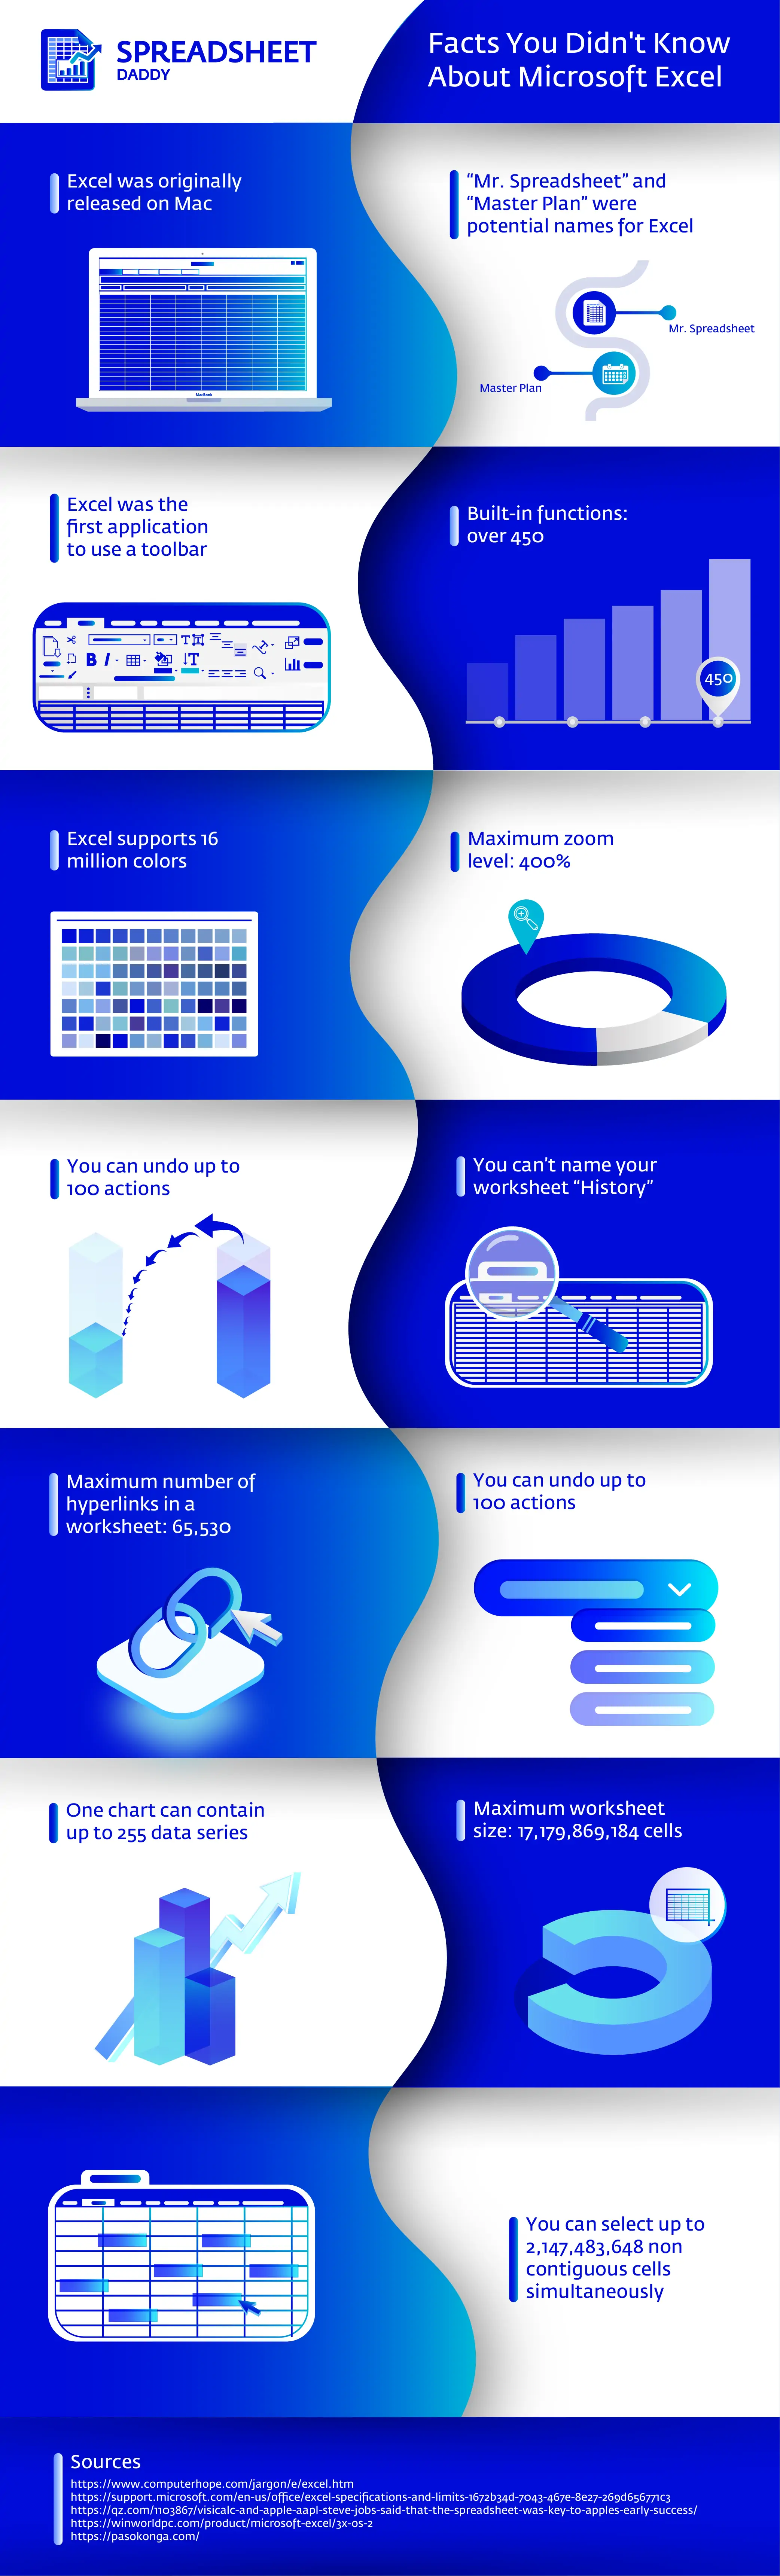 excel facts and statistics - infographic